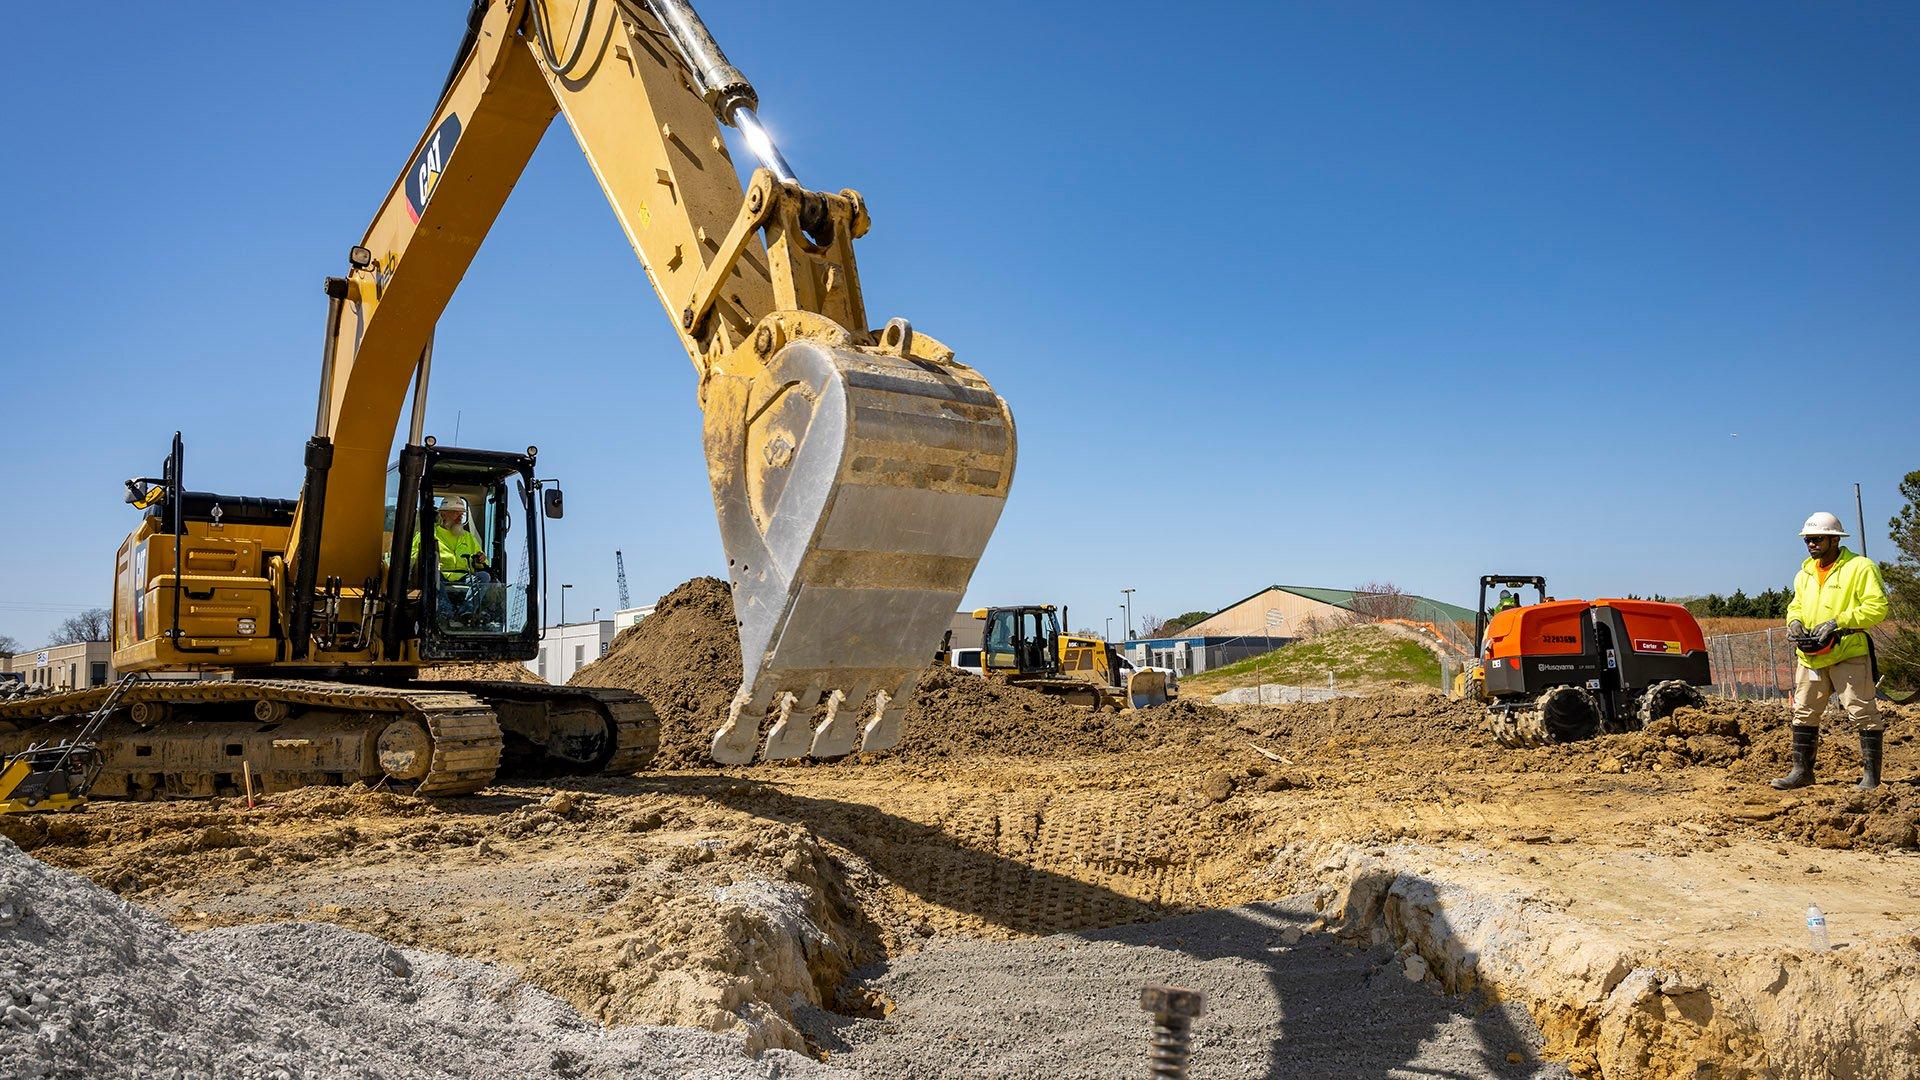 A construction worker watches while another worker operates an excavator digging a trench on a construction site.